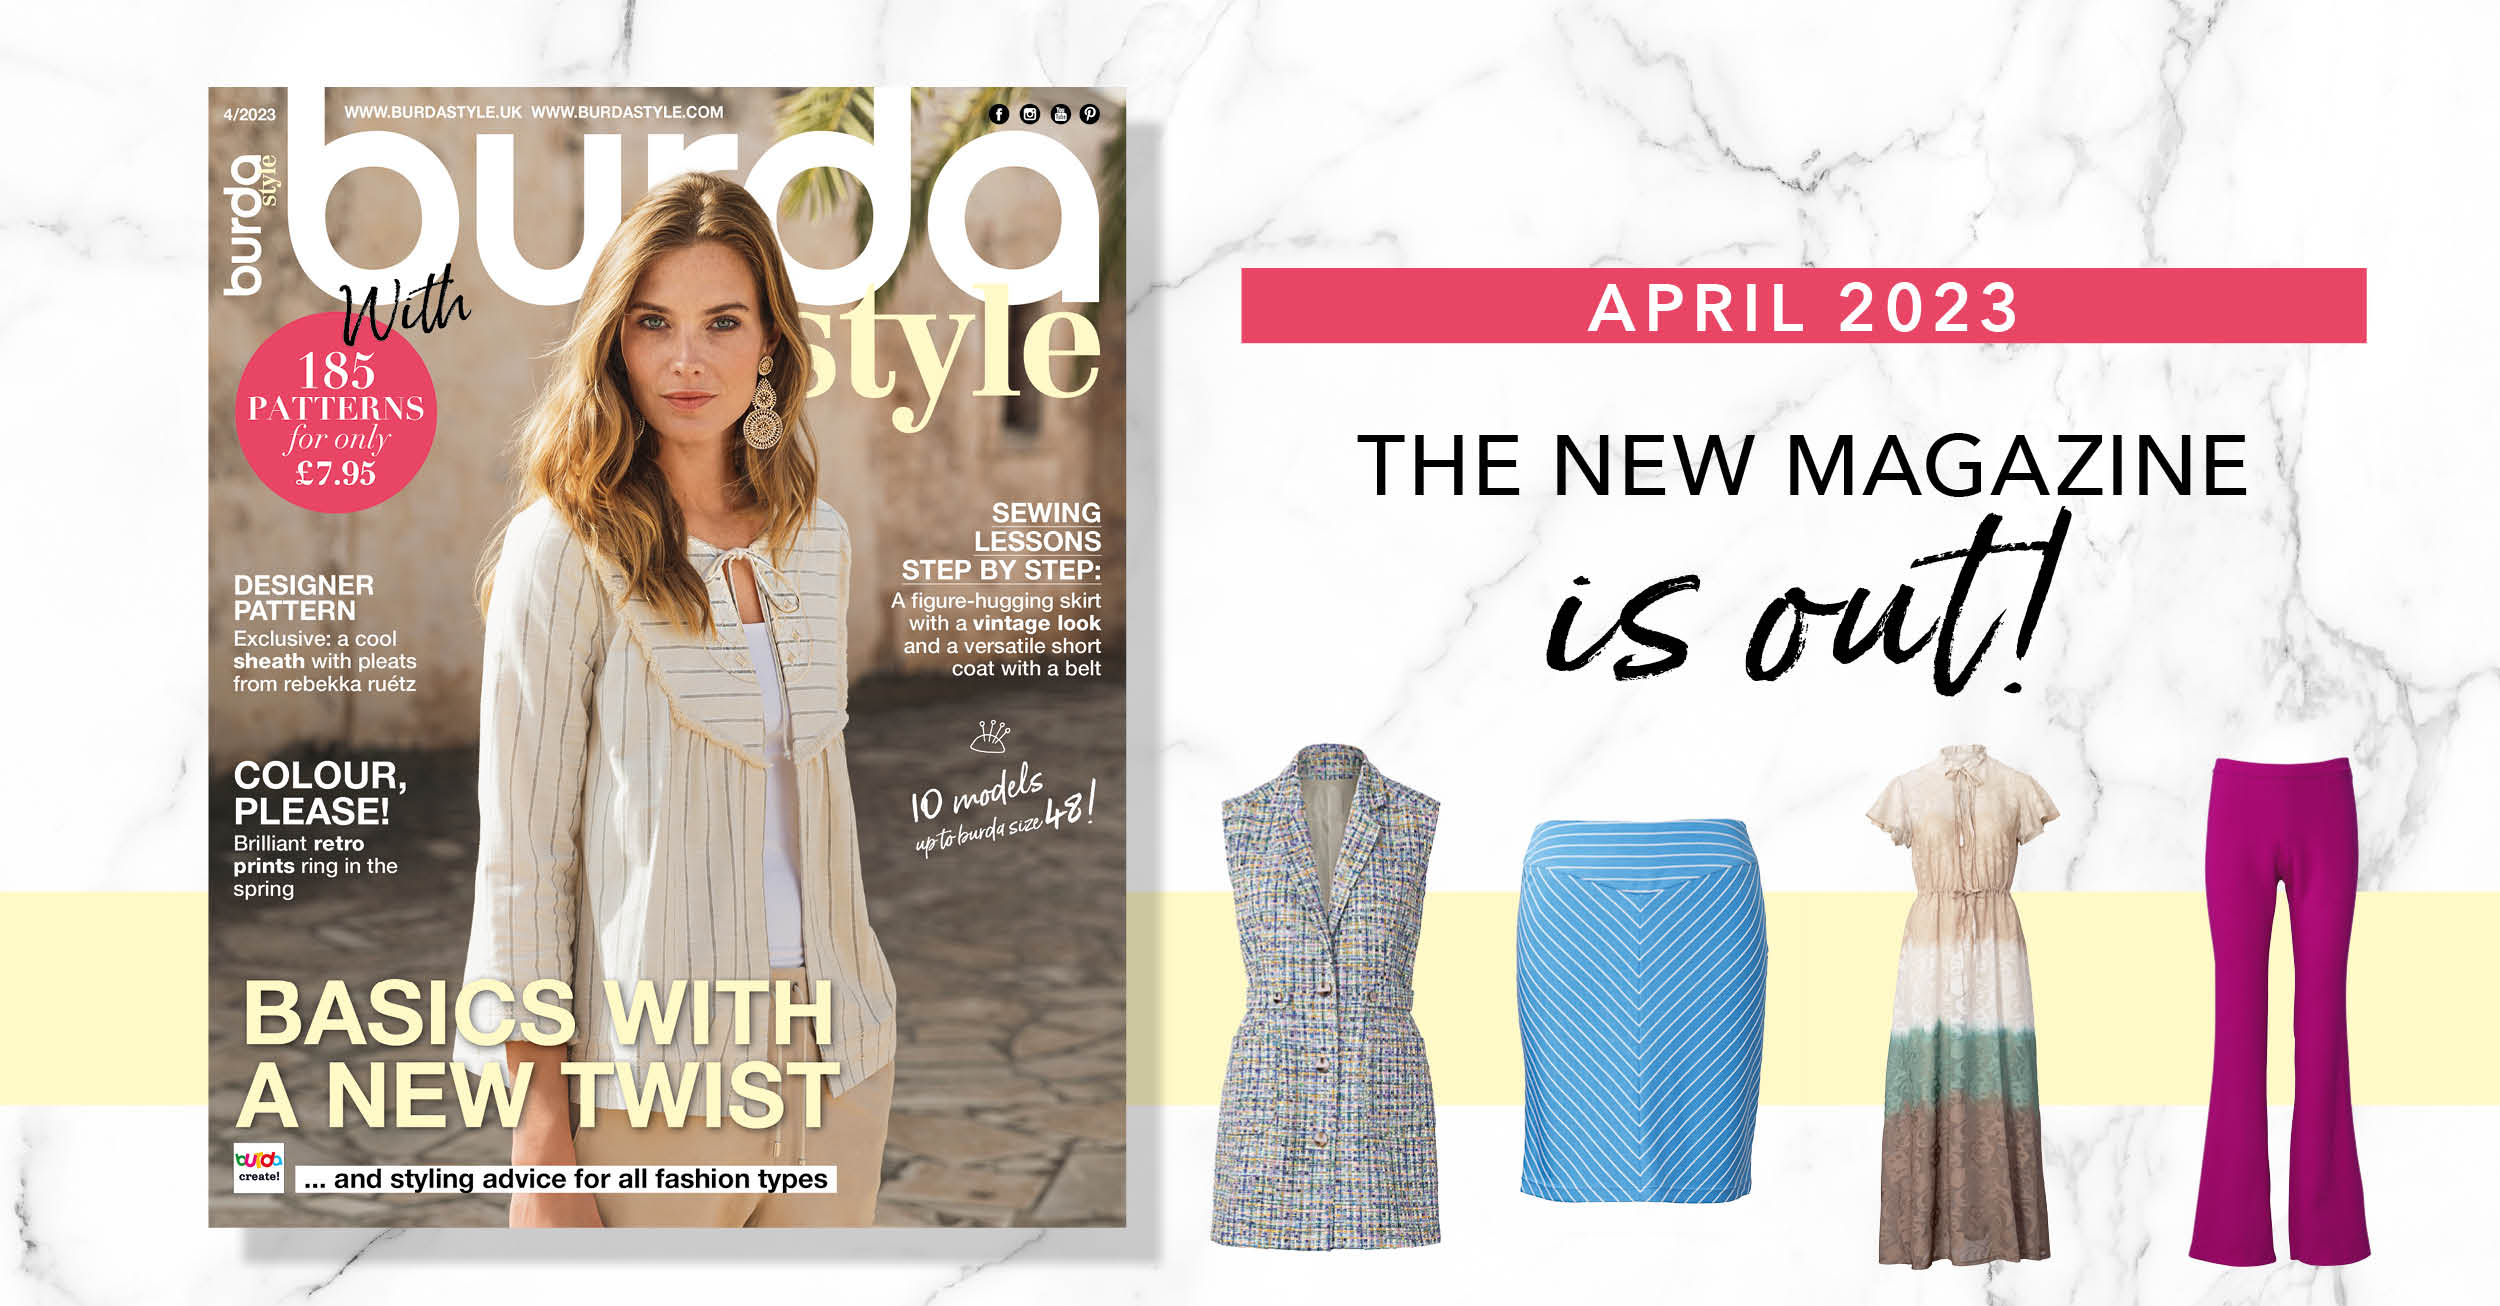 April 2023: The Latest Issue of Burda Style Is Out!